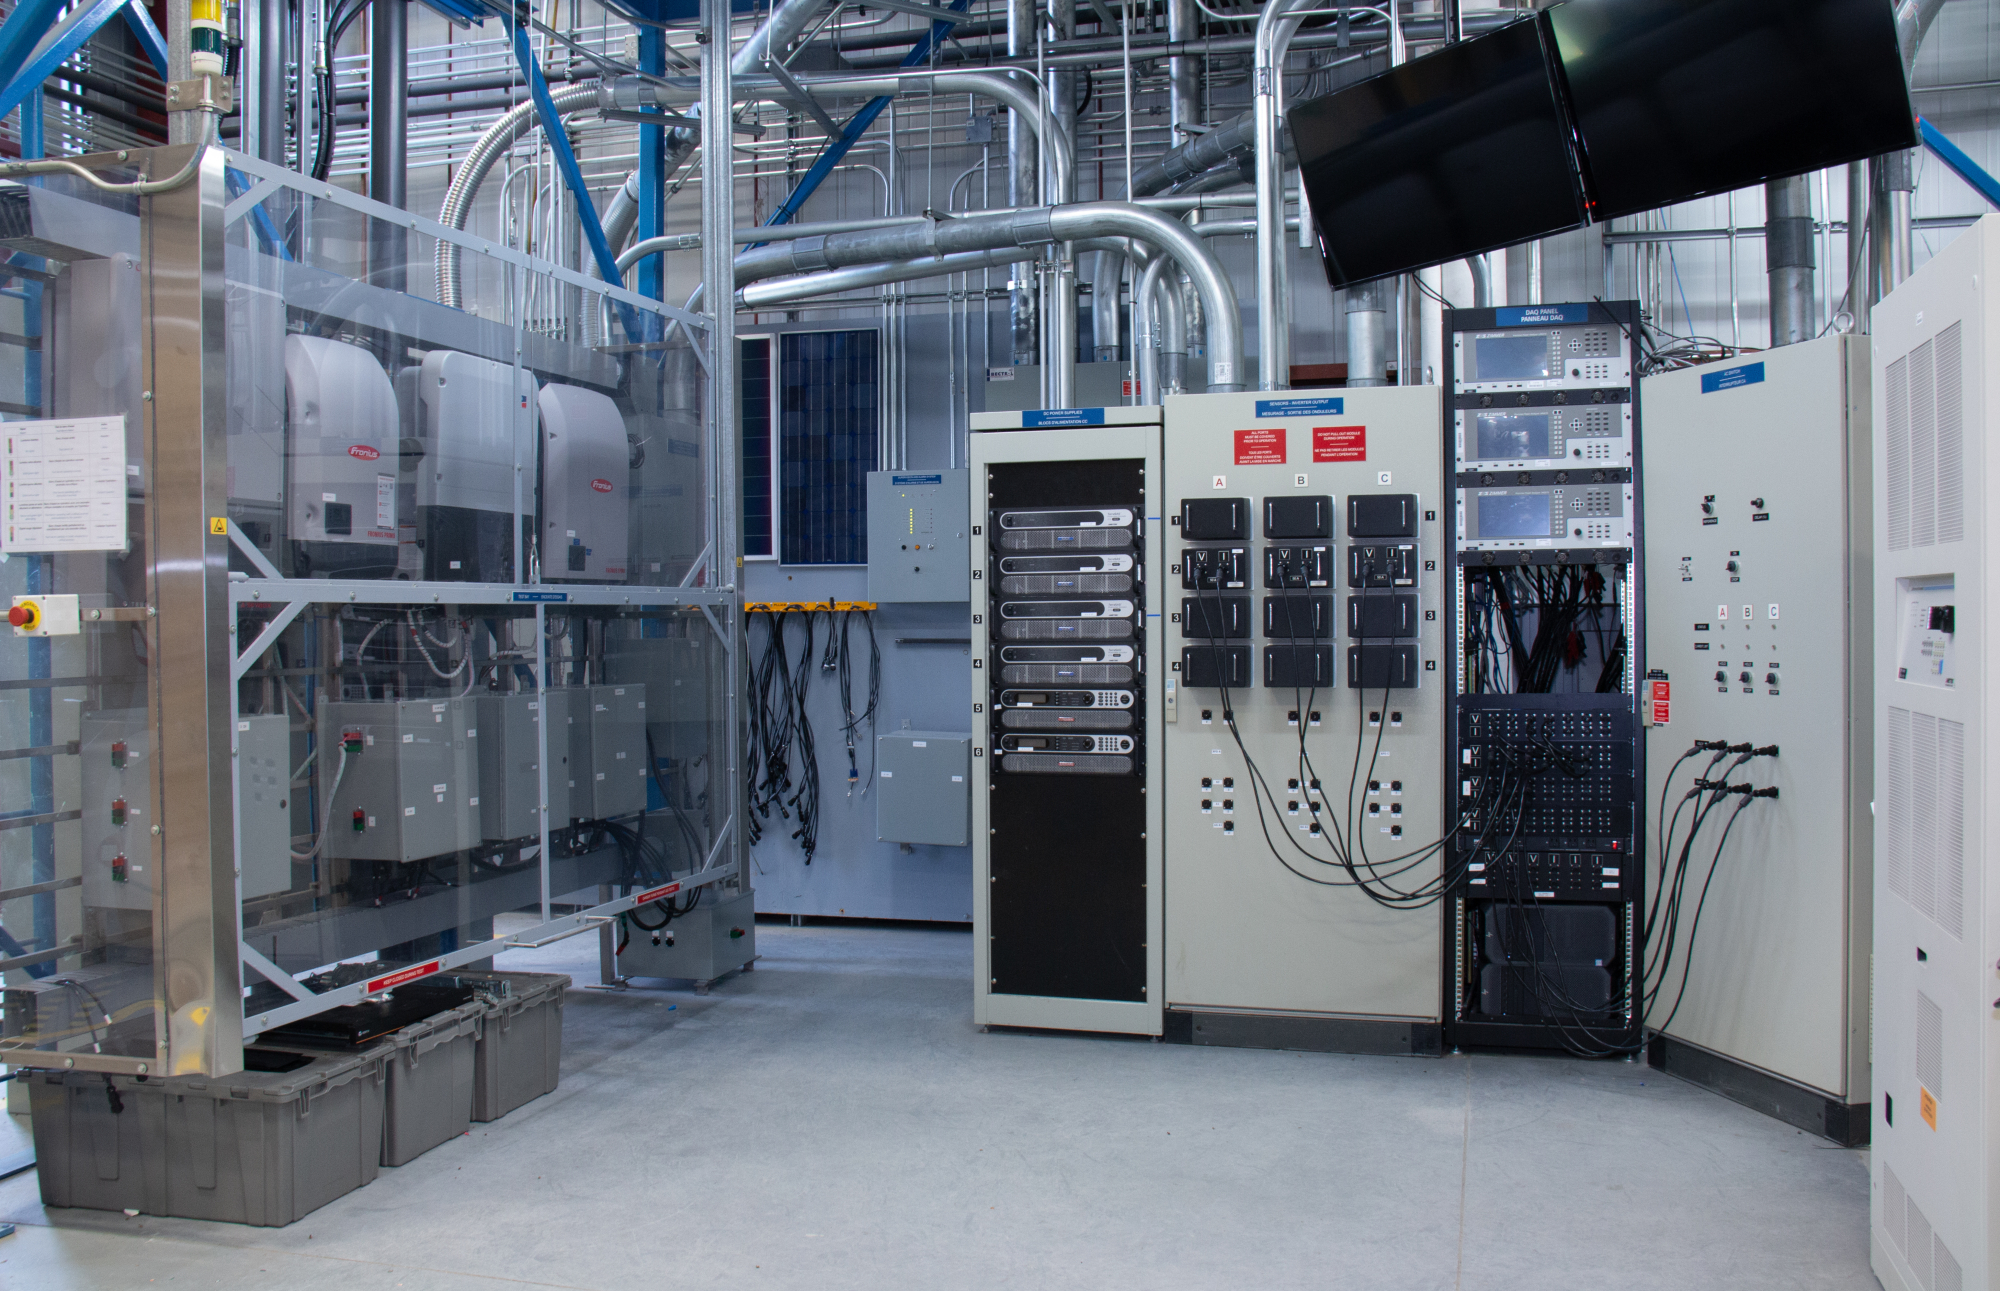  The image shows a view of the inverter and grid emulating test bench at CanmetENERGY in Varennes.